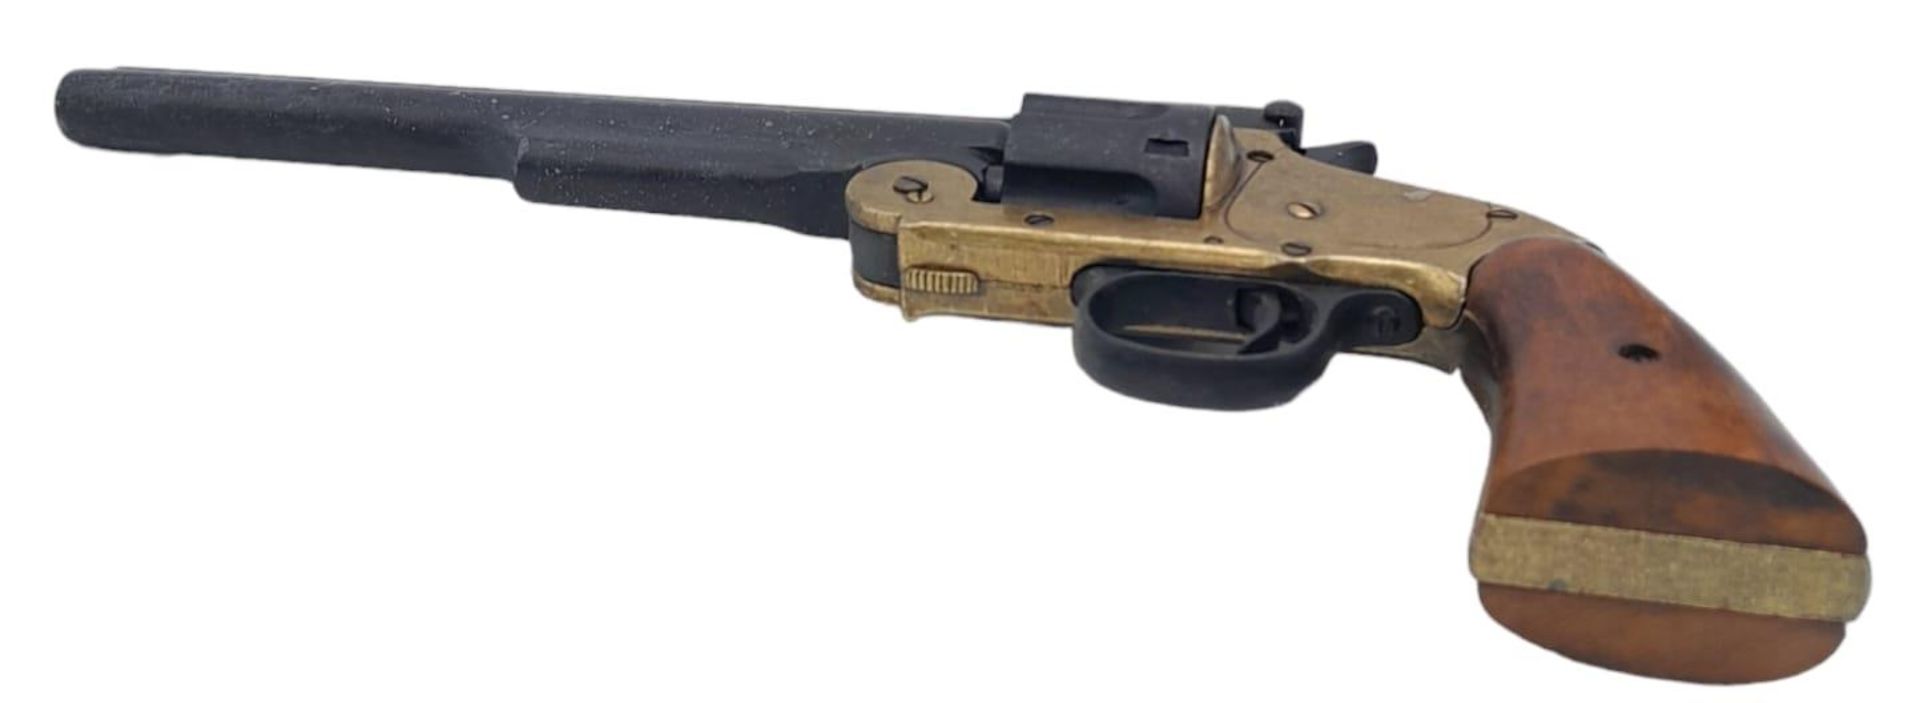 A FULL SIZE METAL REPLICA NAVY COLT SIX CHAMBER PISTOL WITH DRY FIRING ACTION AND REVOLVING BARREL - Image 2 of 8